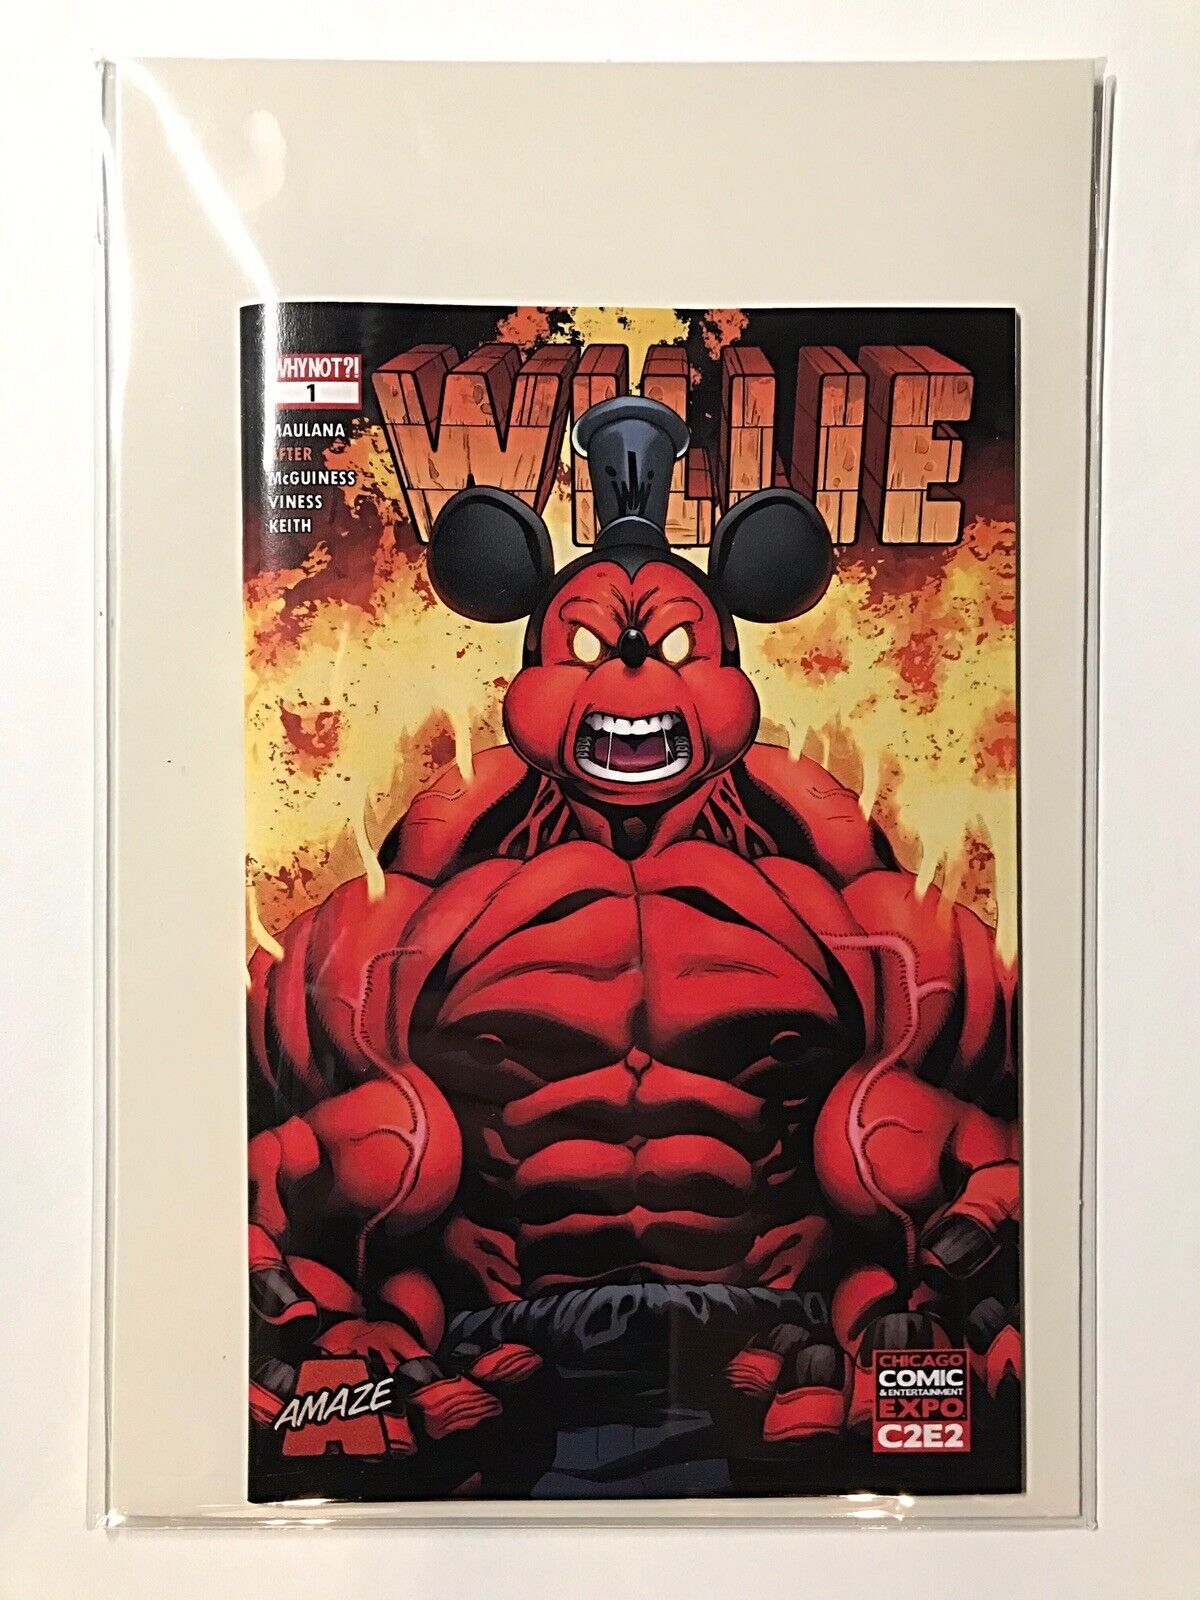 Why Not ? Willie 1 Red Hulk C2E2 Exclusive Ltd 300 Ashcan Low Print